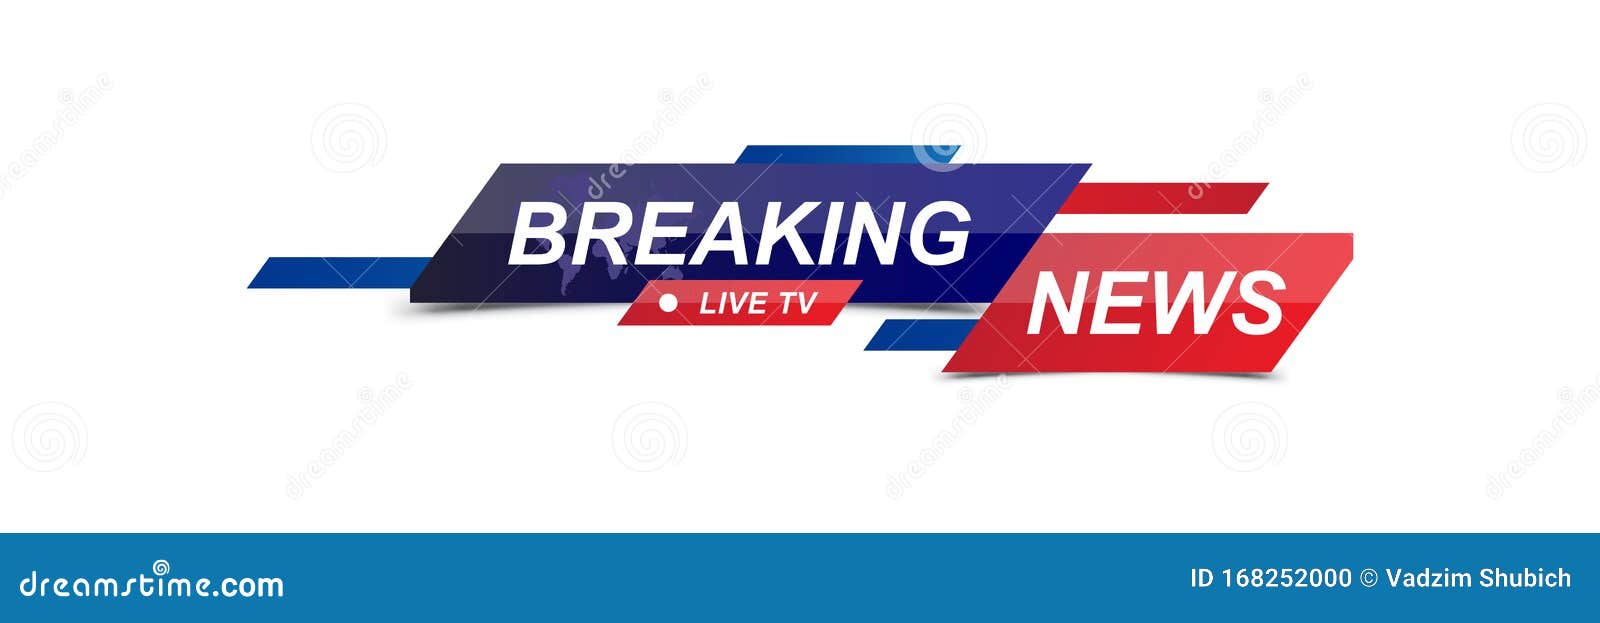 Breaking News Template Title With World Map On White Background For Screen Tv Channel Flat Vector Illustration Eps10 Stock Vector Illustration Of Communication Communicate